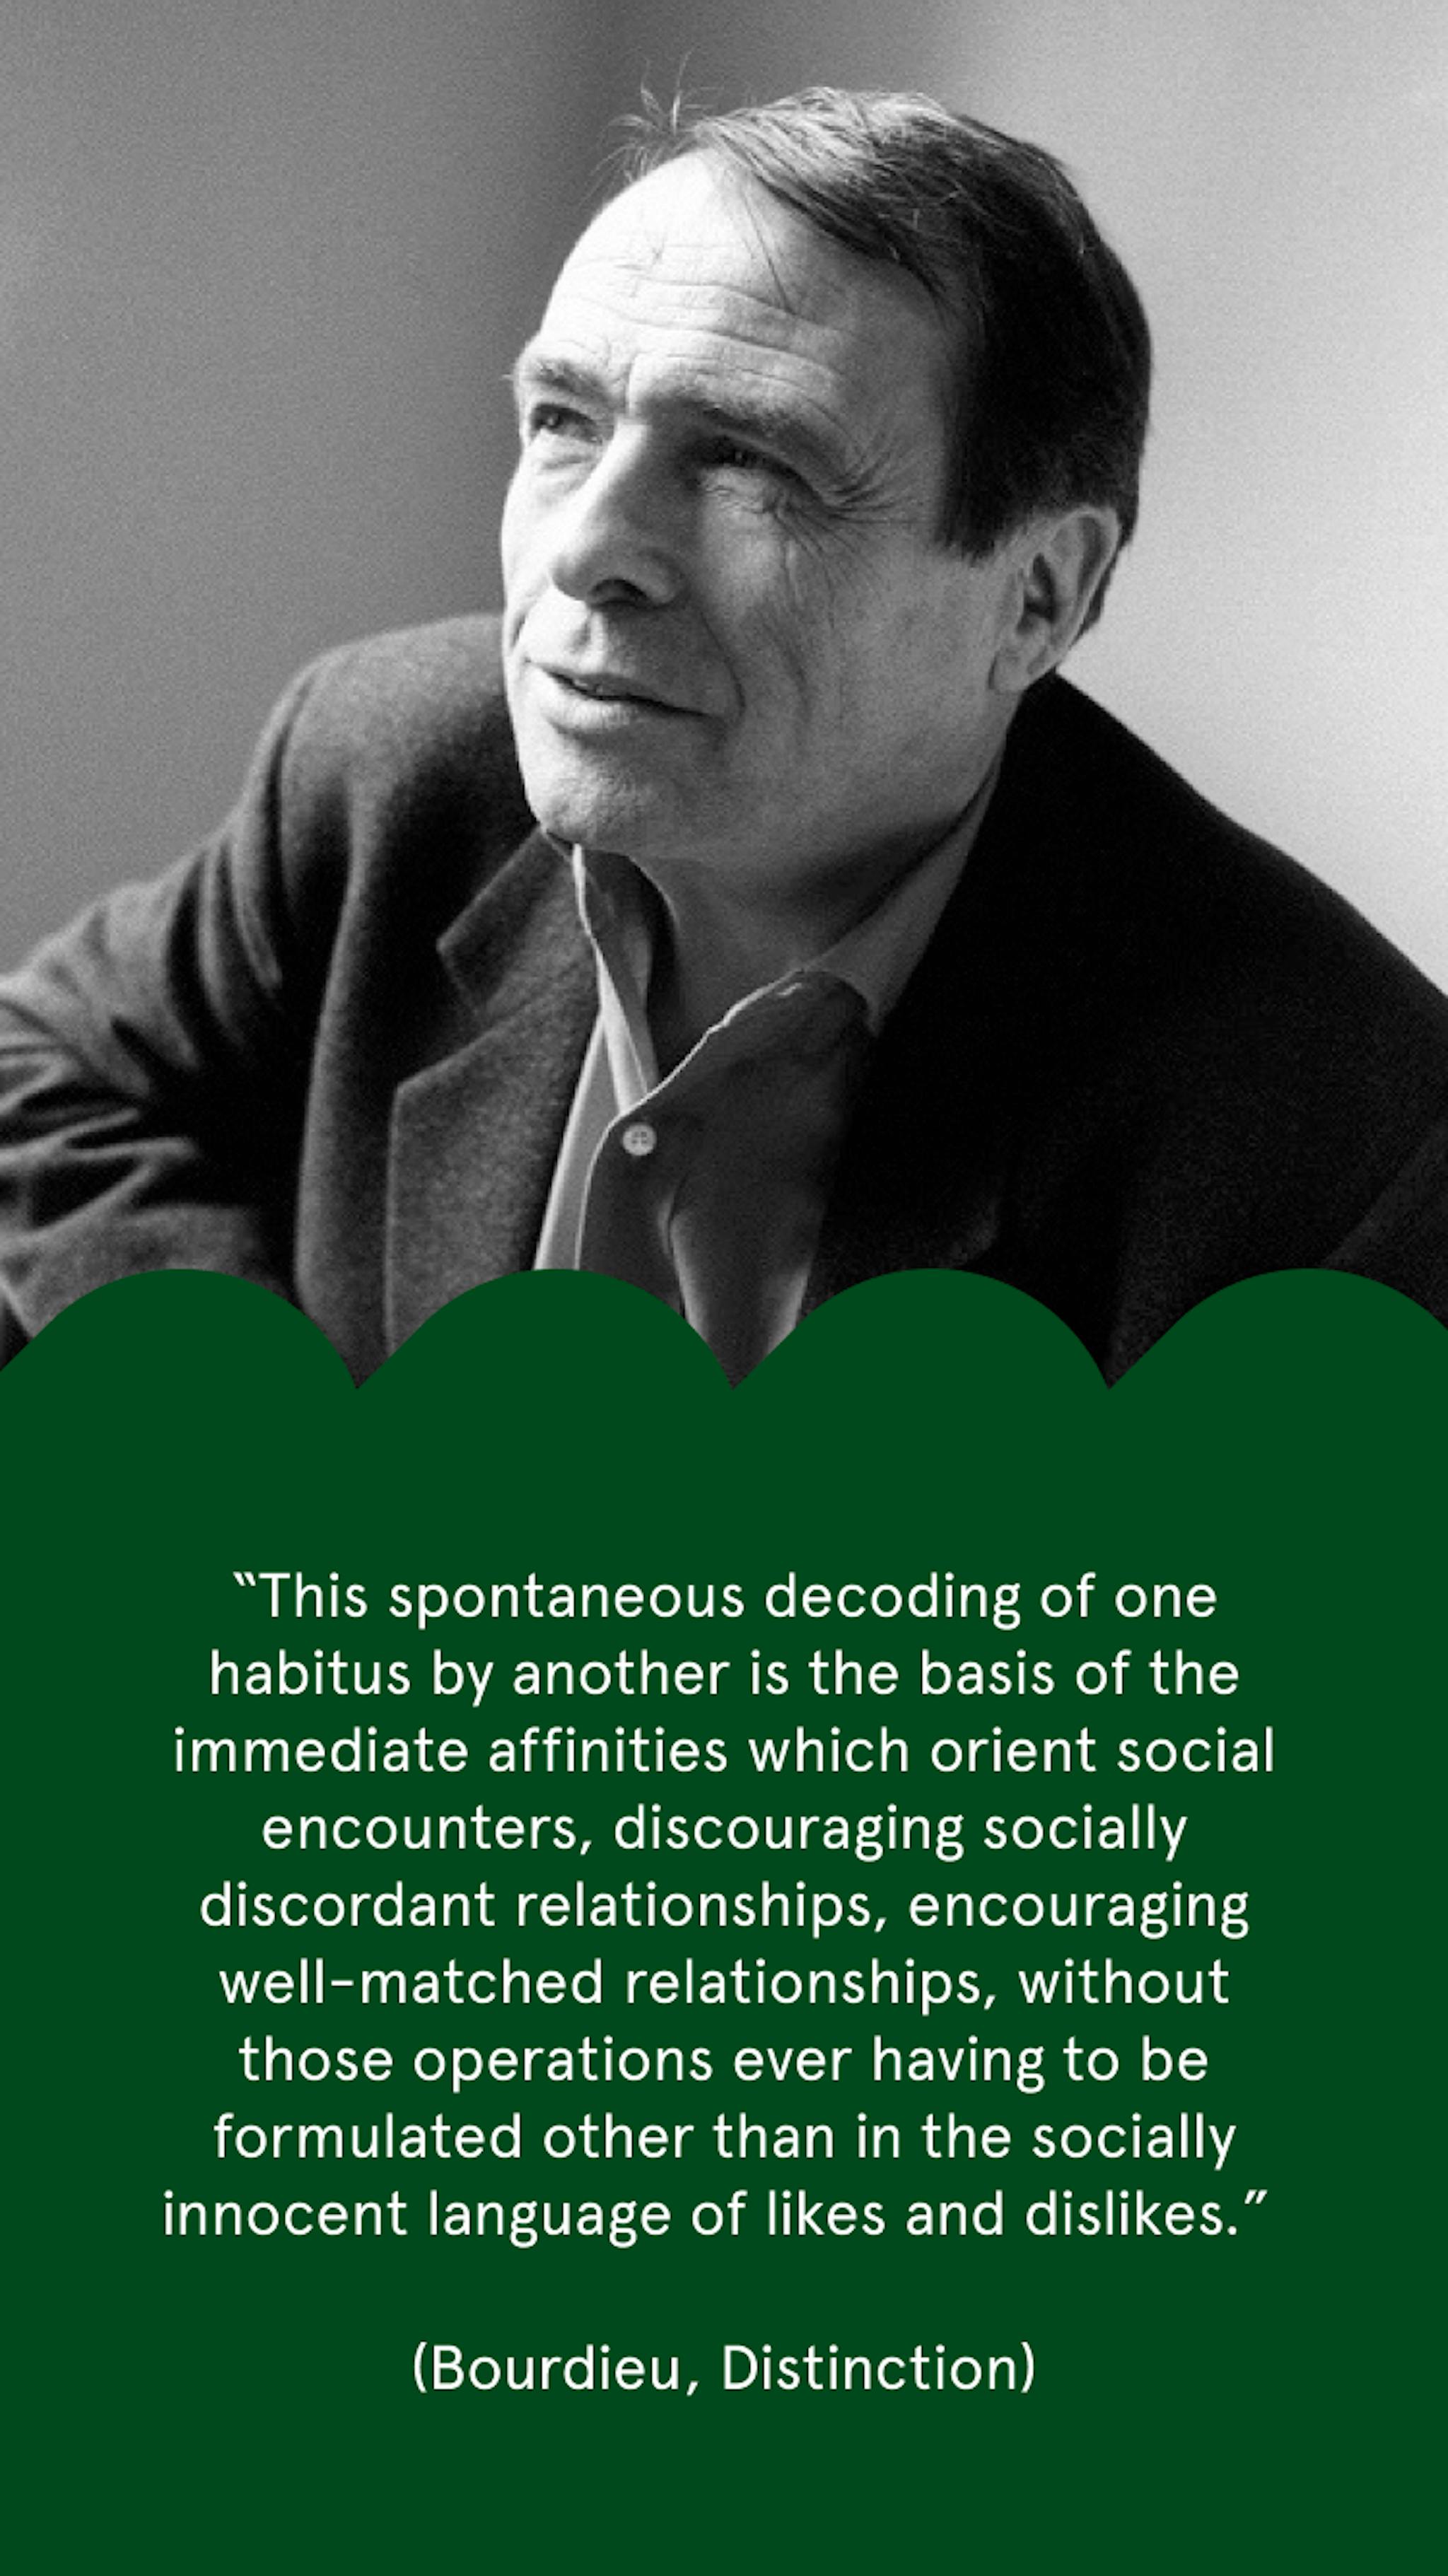 Quote from Pierre Bourdieu